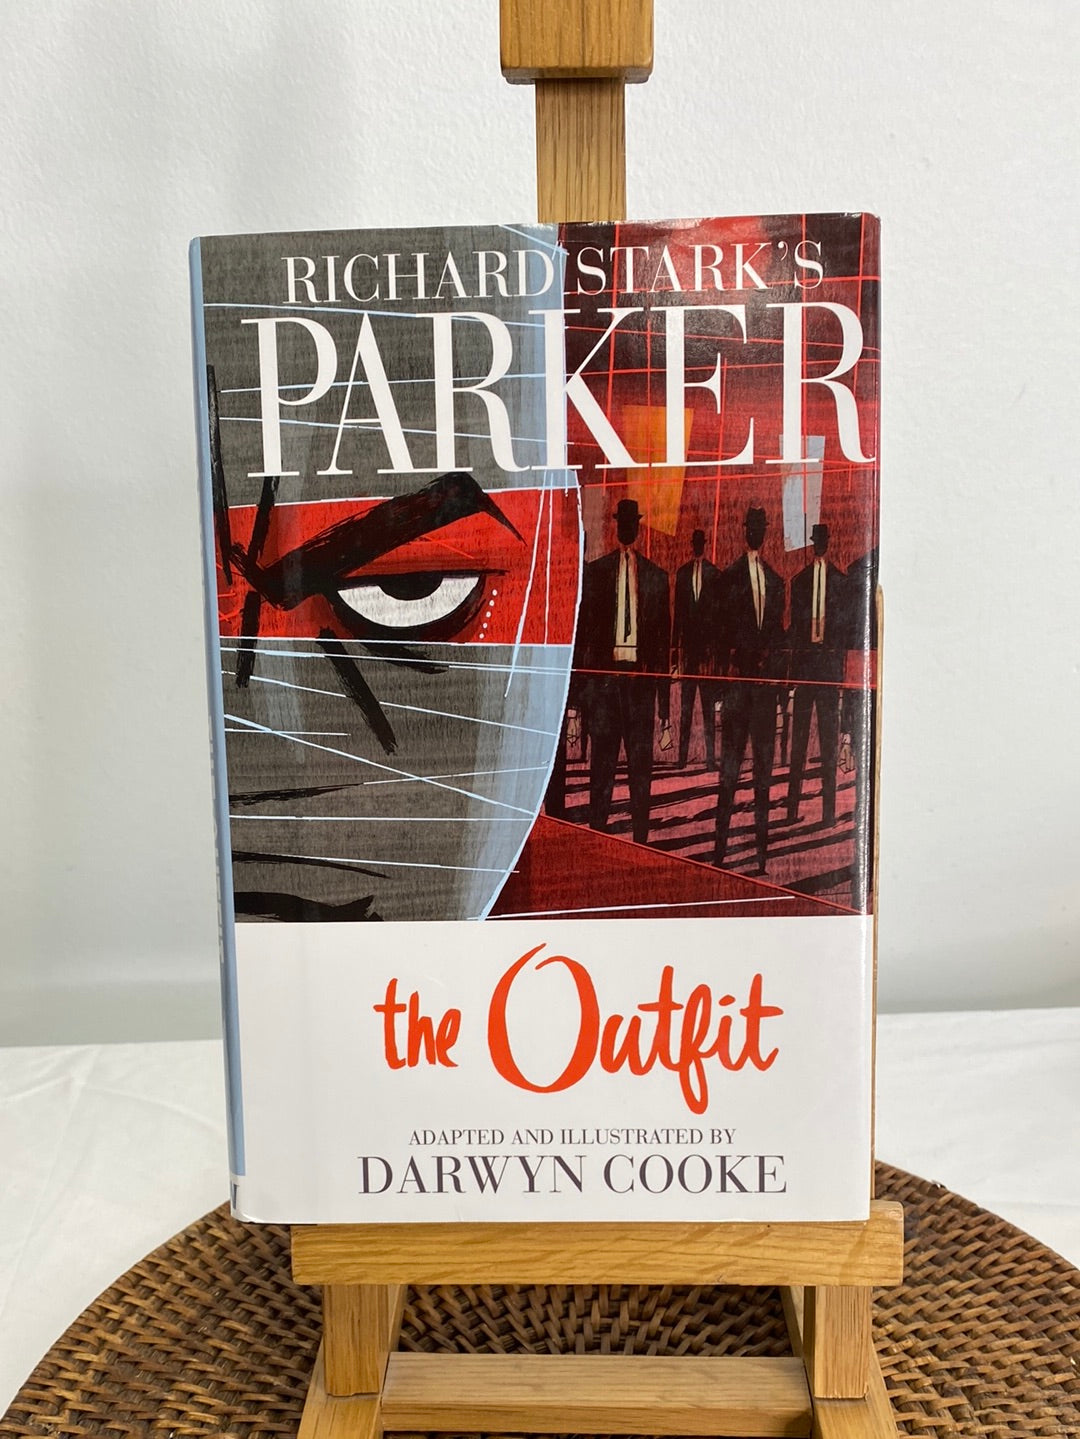 Parker Series: The Outfit - Richard Stark